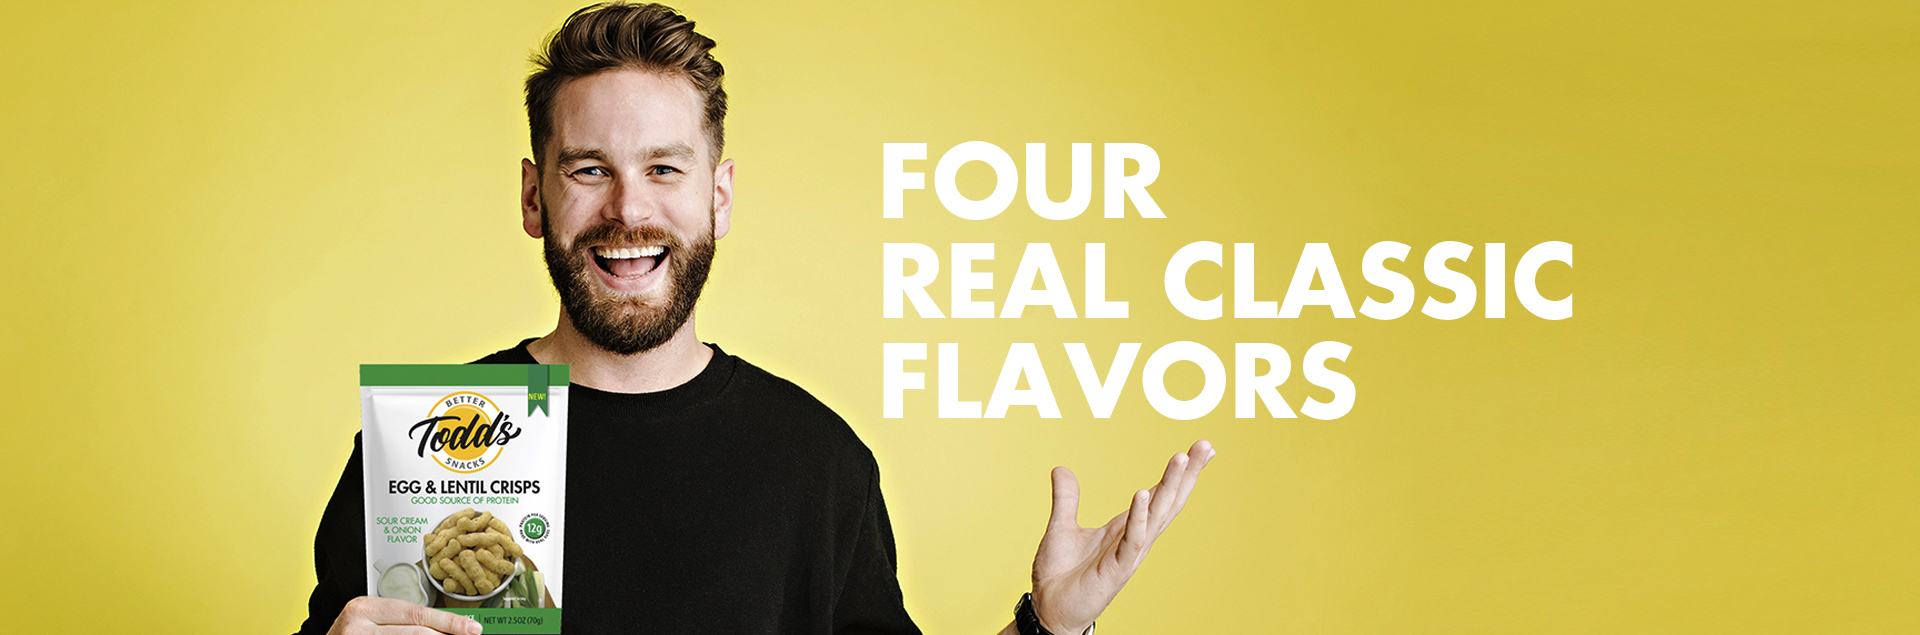 four real classic flavors